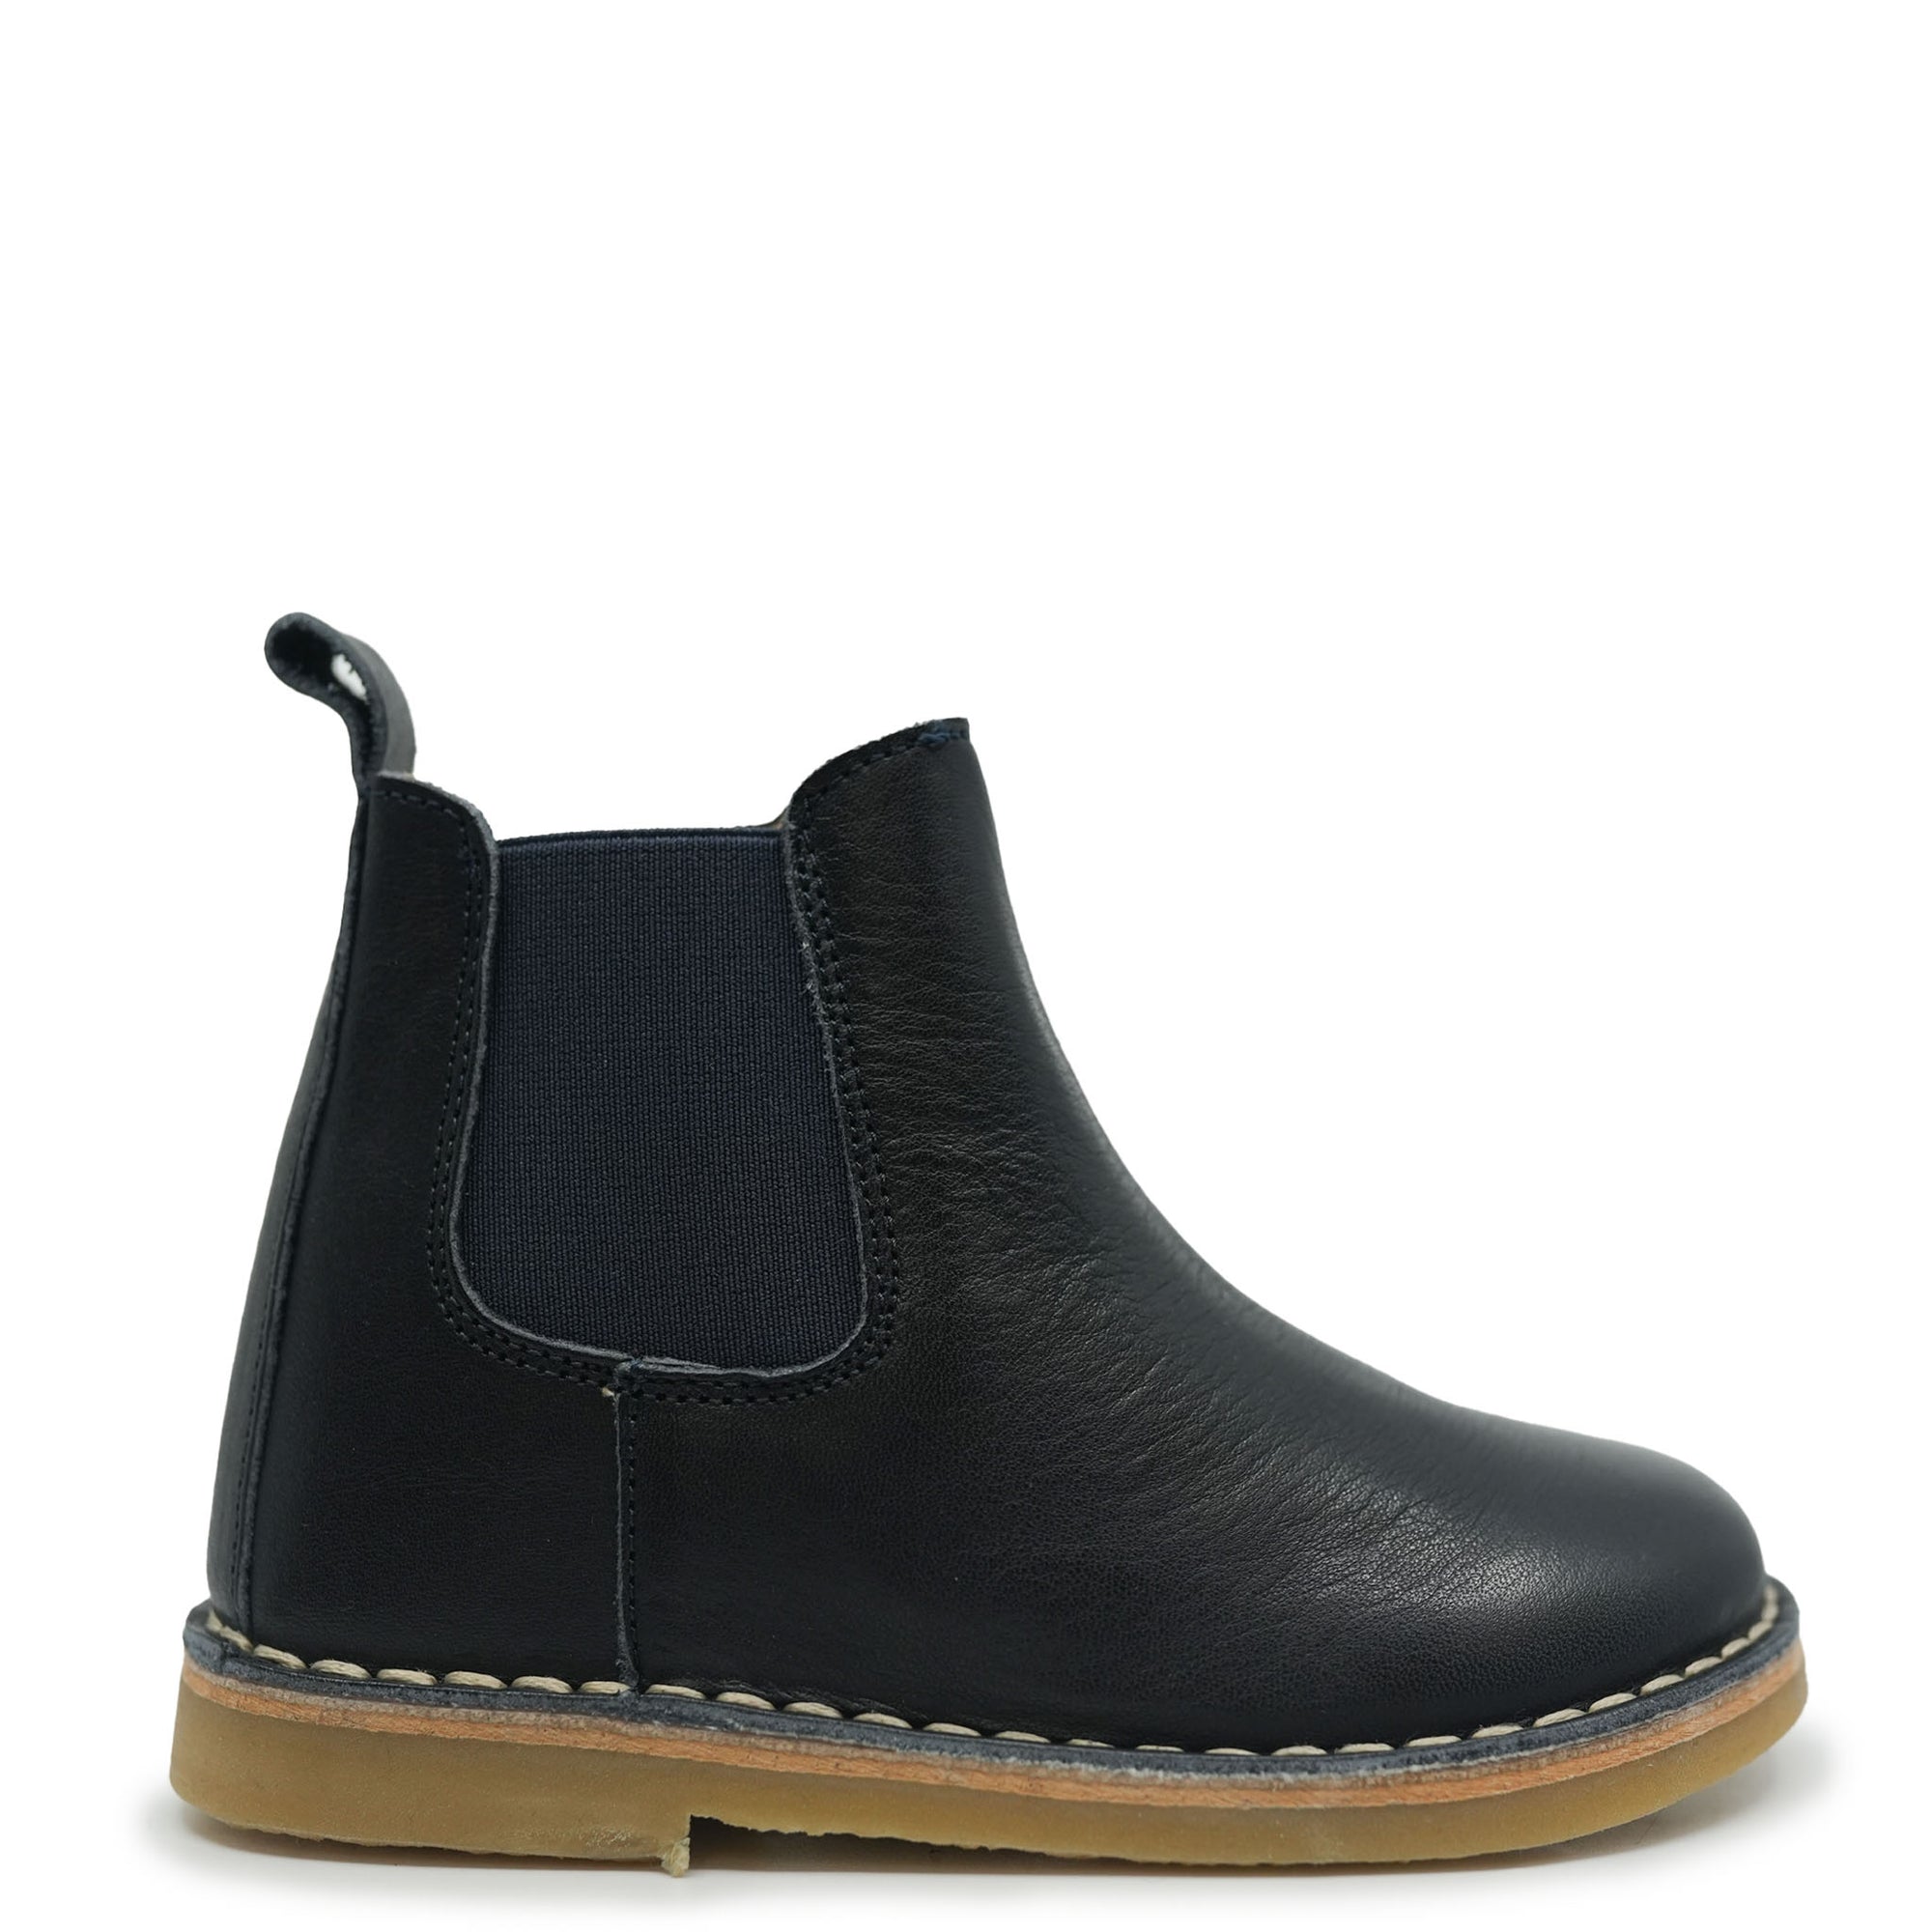 Petit Nord Navy Leather Boot-Tassel Children Shoes